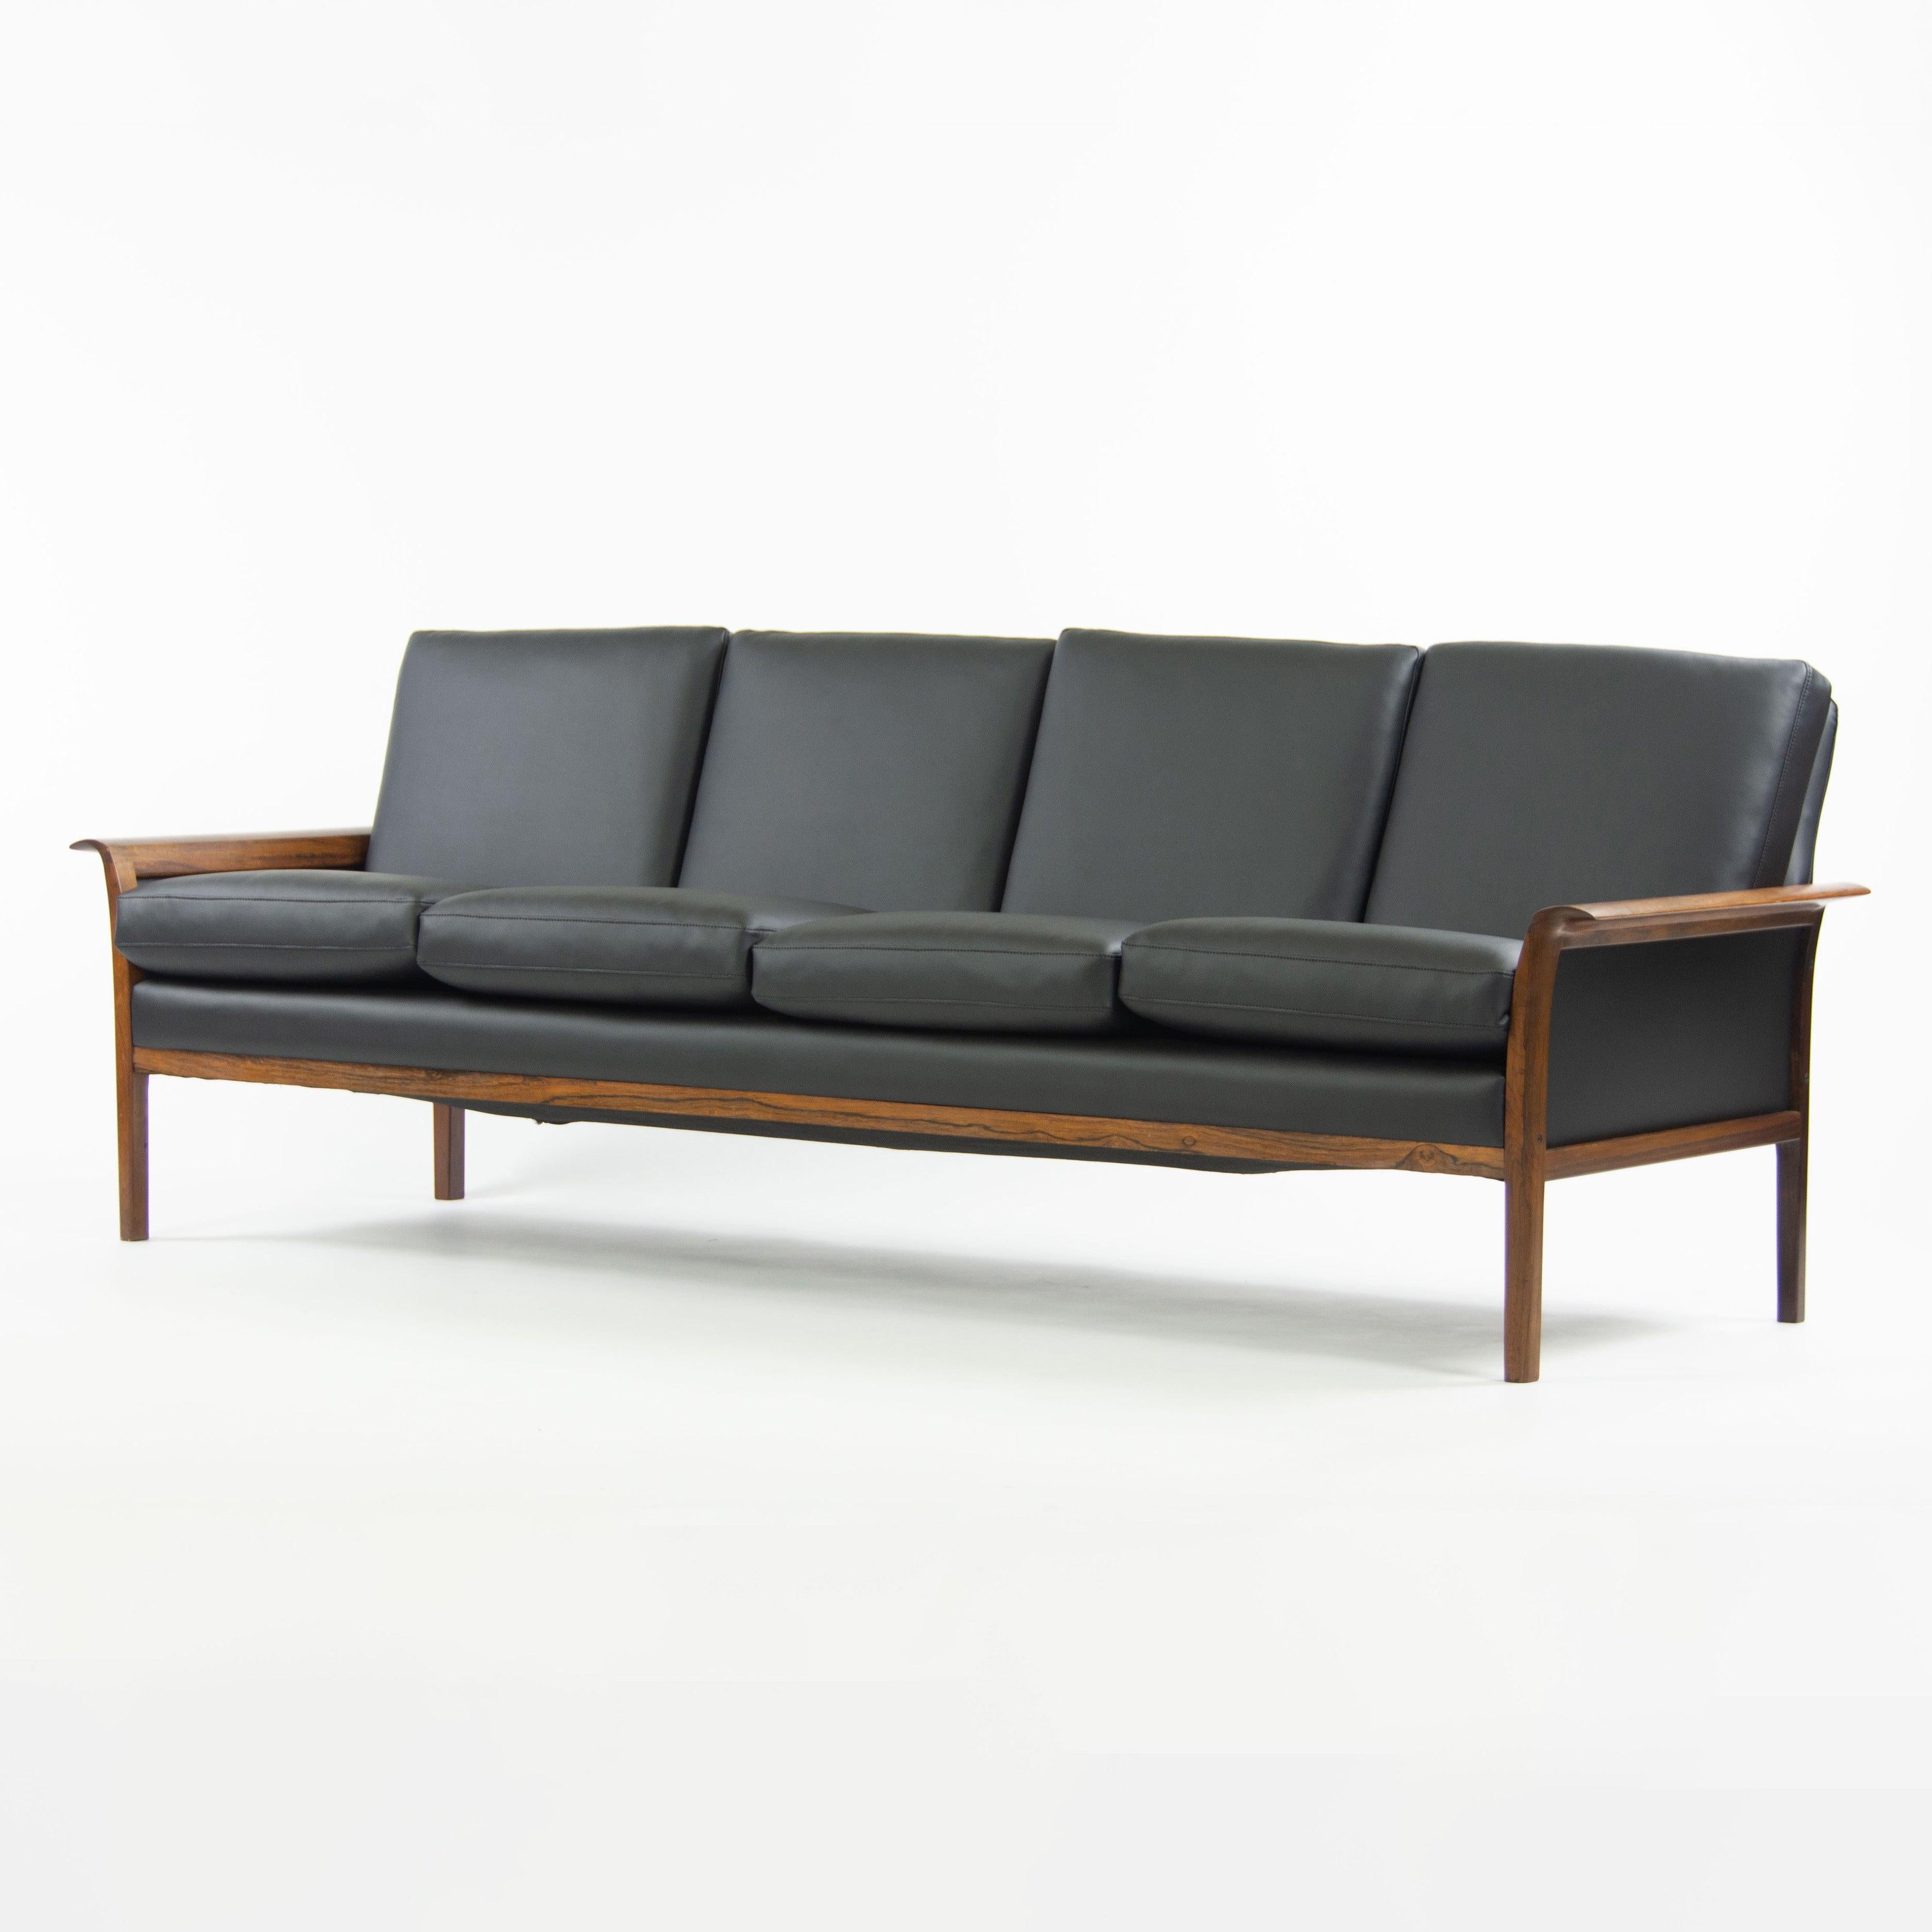 Listed for sale is a gorgeous and authentic Knut Saeter rosewood sofa, produced by Vatne Mobler. This example has just been freshly reupholstered at a cost of well over $2500. The upholstery is stunning, contrasting nicely with the rosewood frame.